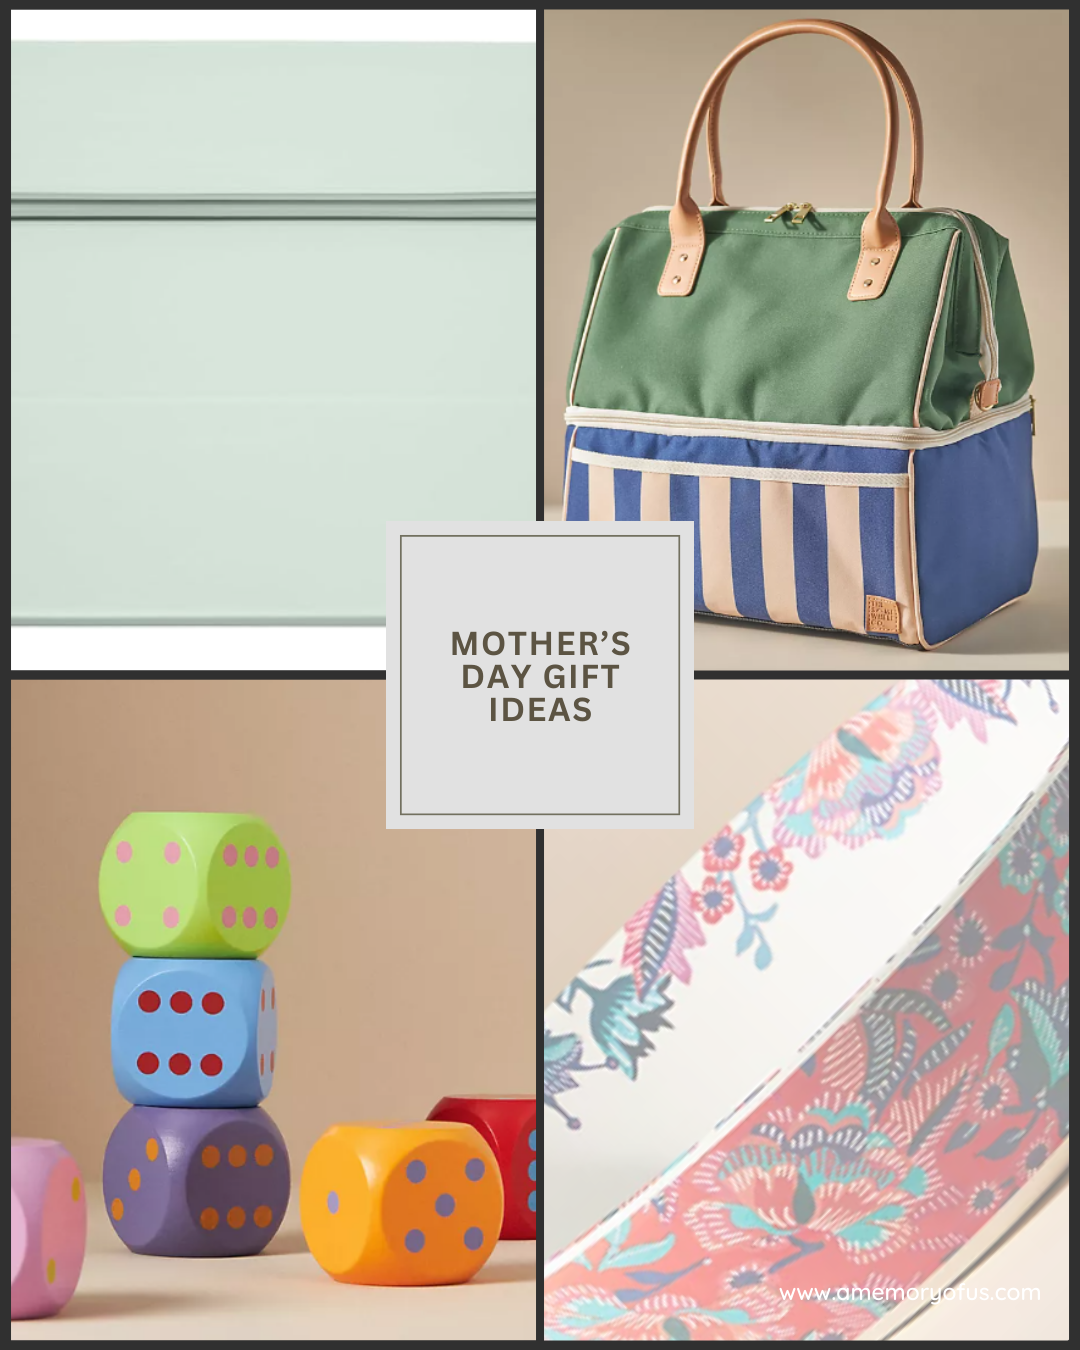 Mother's Day Gift Ideas | What to buy your wife for mother's day 2024 | mother's day gift ideas 2024 | what to buy for a mother's day present | gift ideas for mother's day | mother's day gift ideas | a memory of us